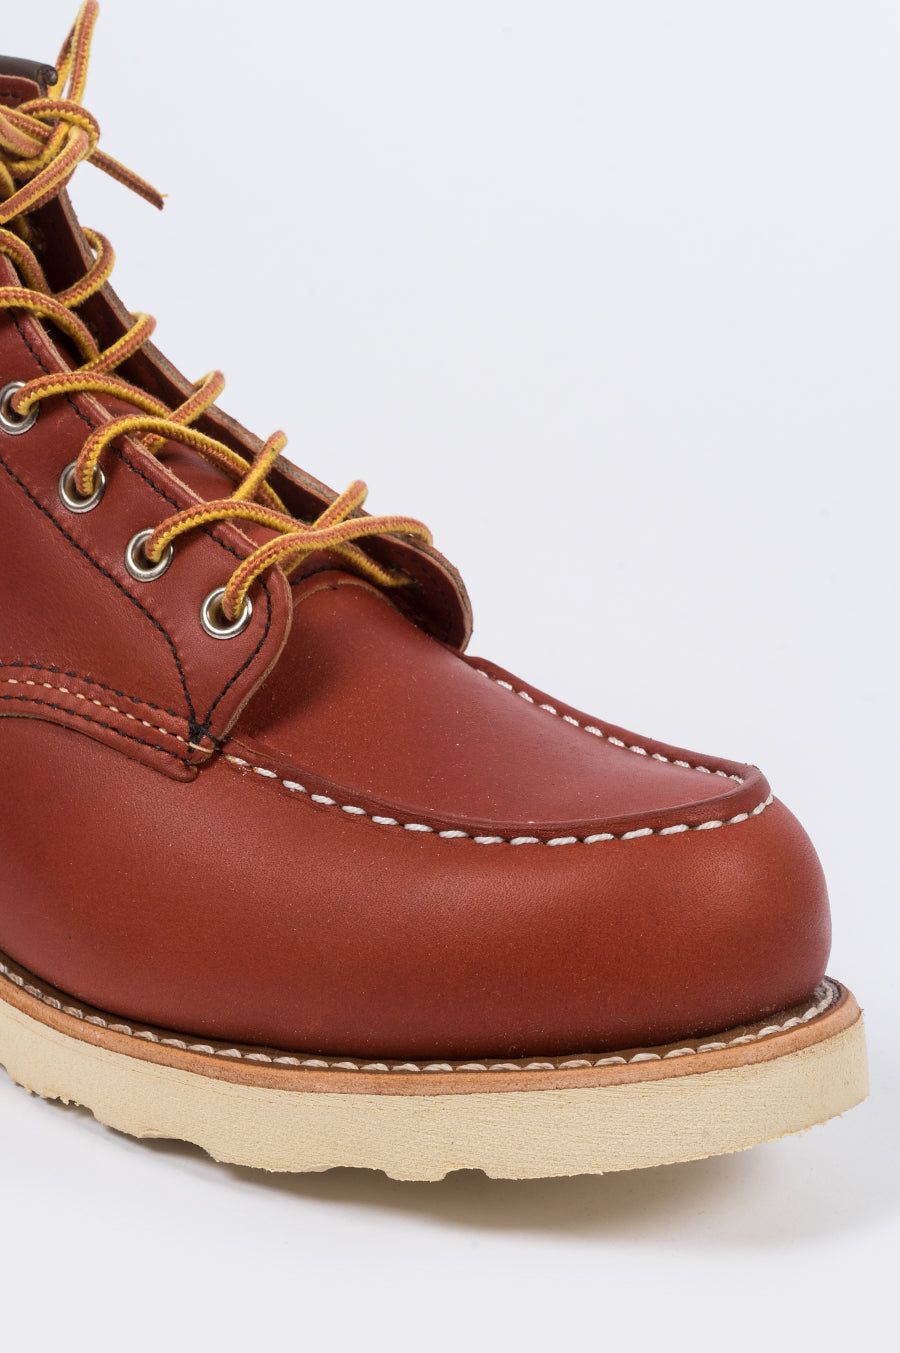 RED WING 6" CLASSIC MOC ORO RUSSET - BLENDS